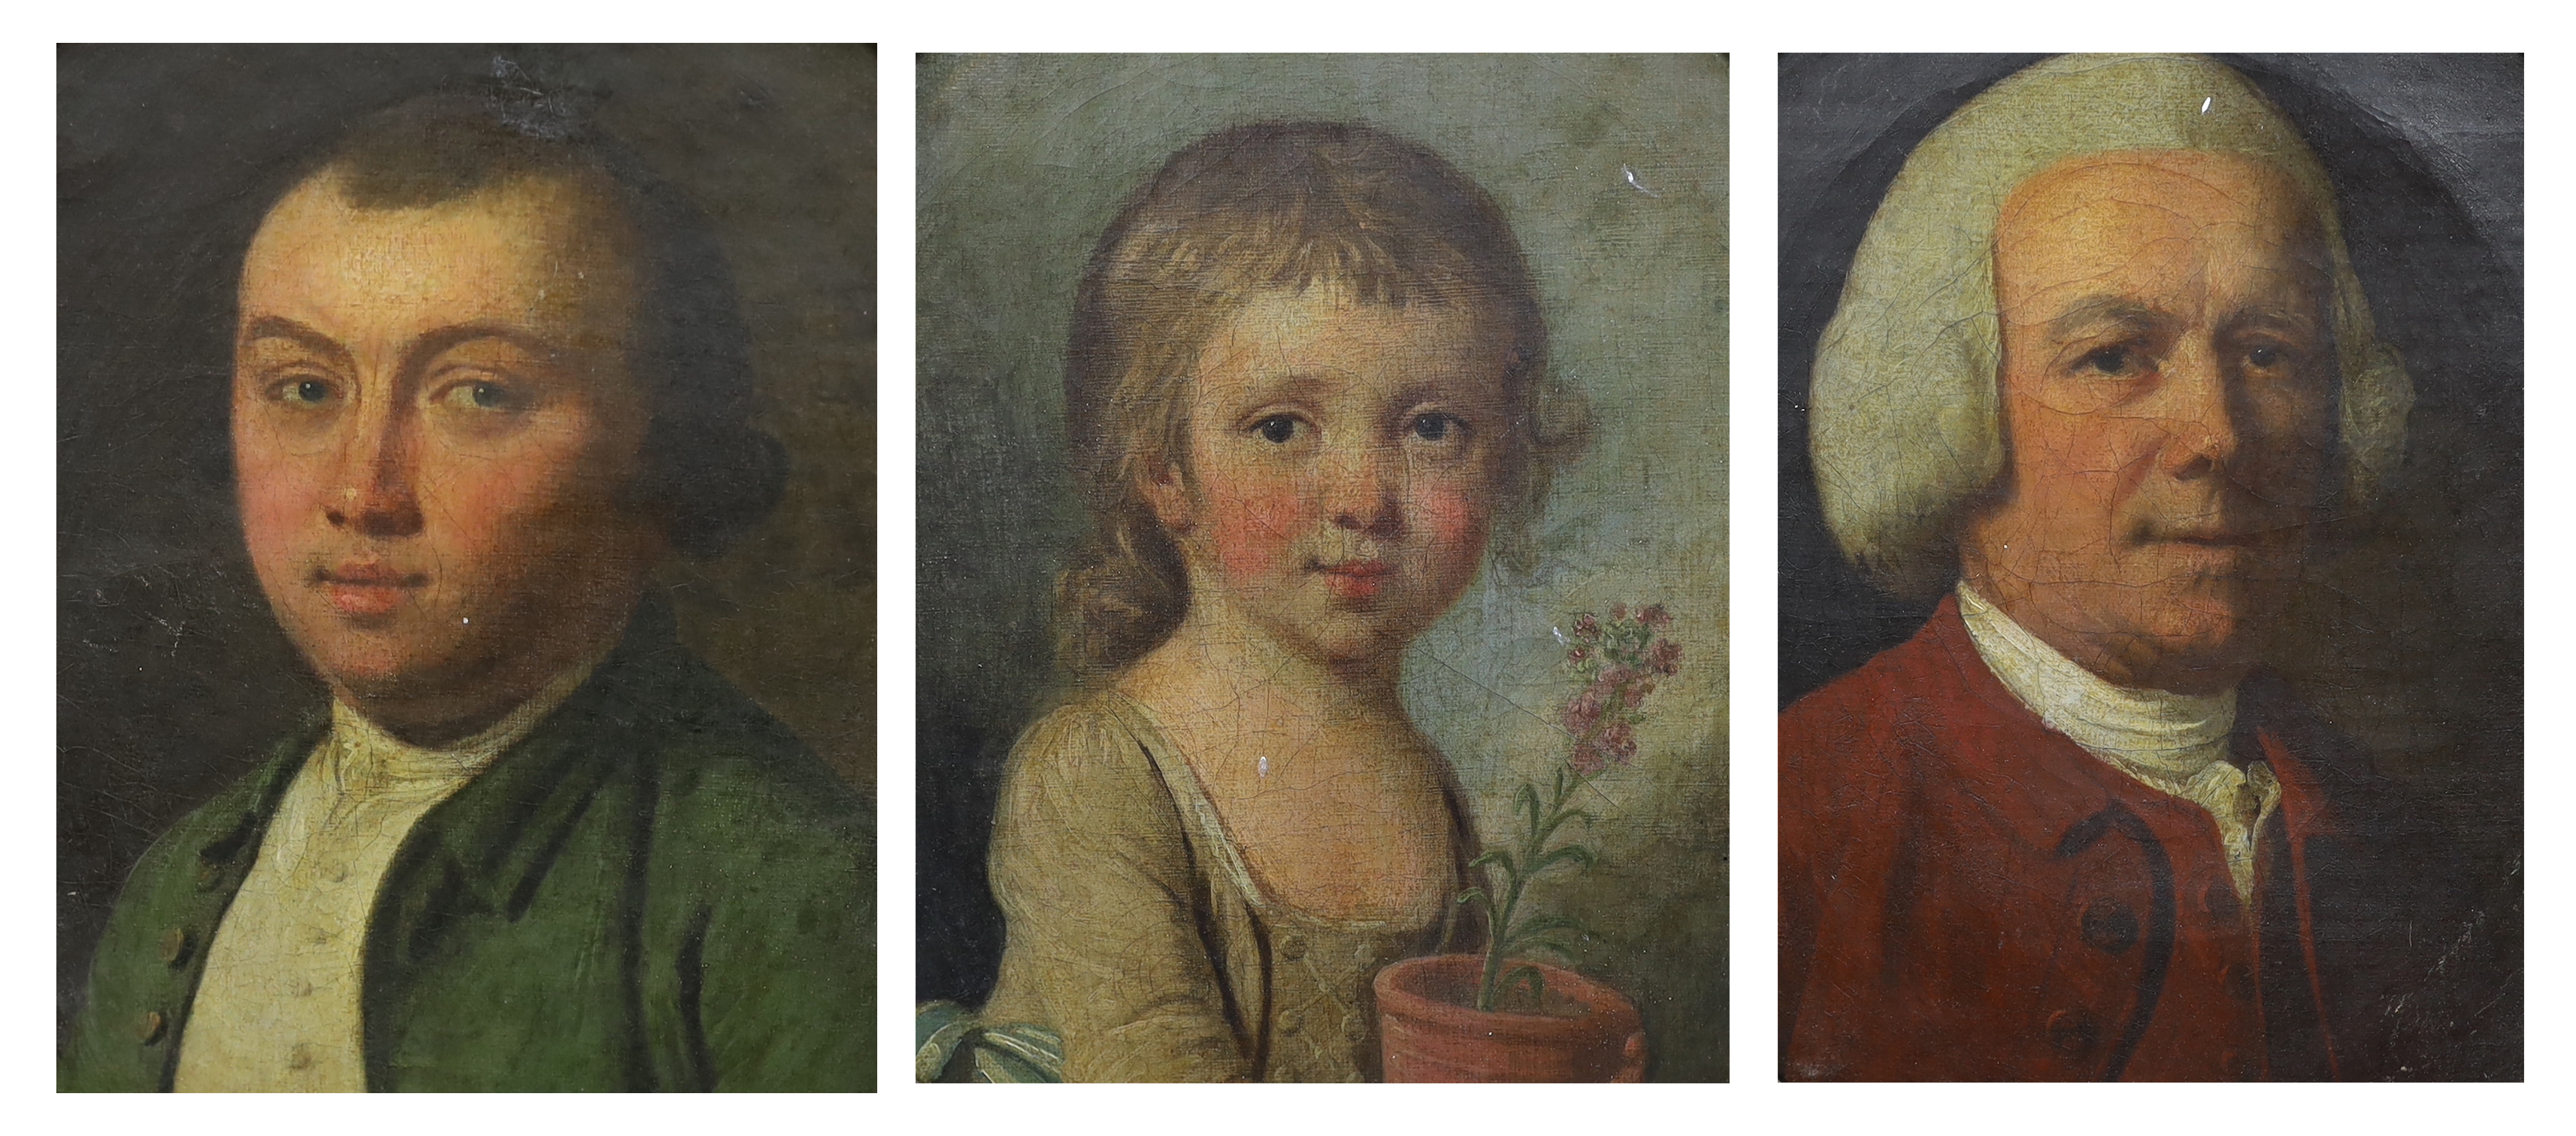 English School c.1770, Portraits of members of the Burgoyne family, oils on canvas (3), largest 31 x 25cm